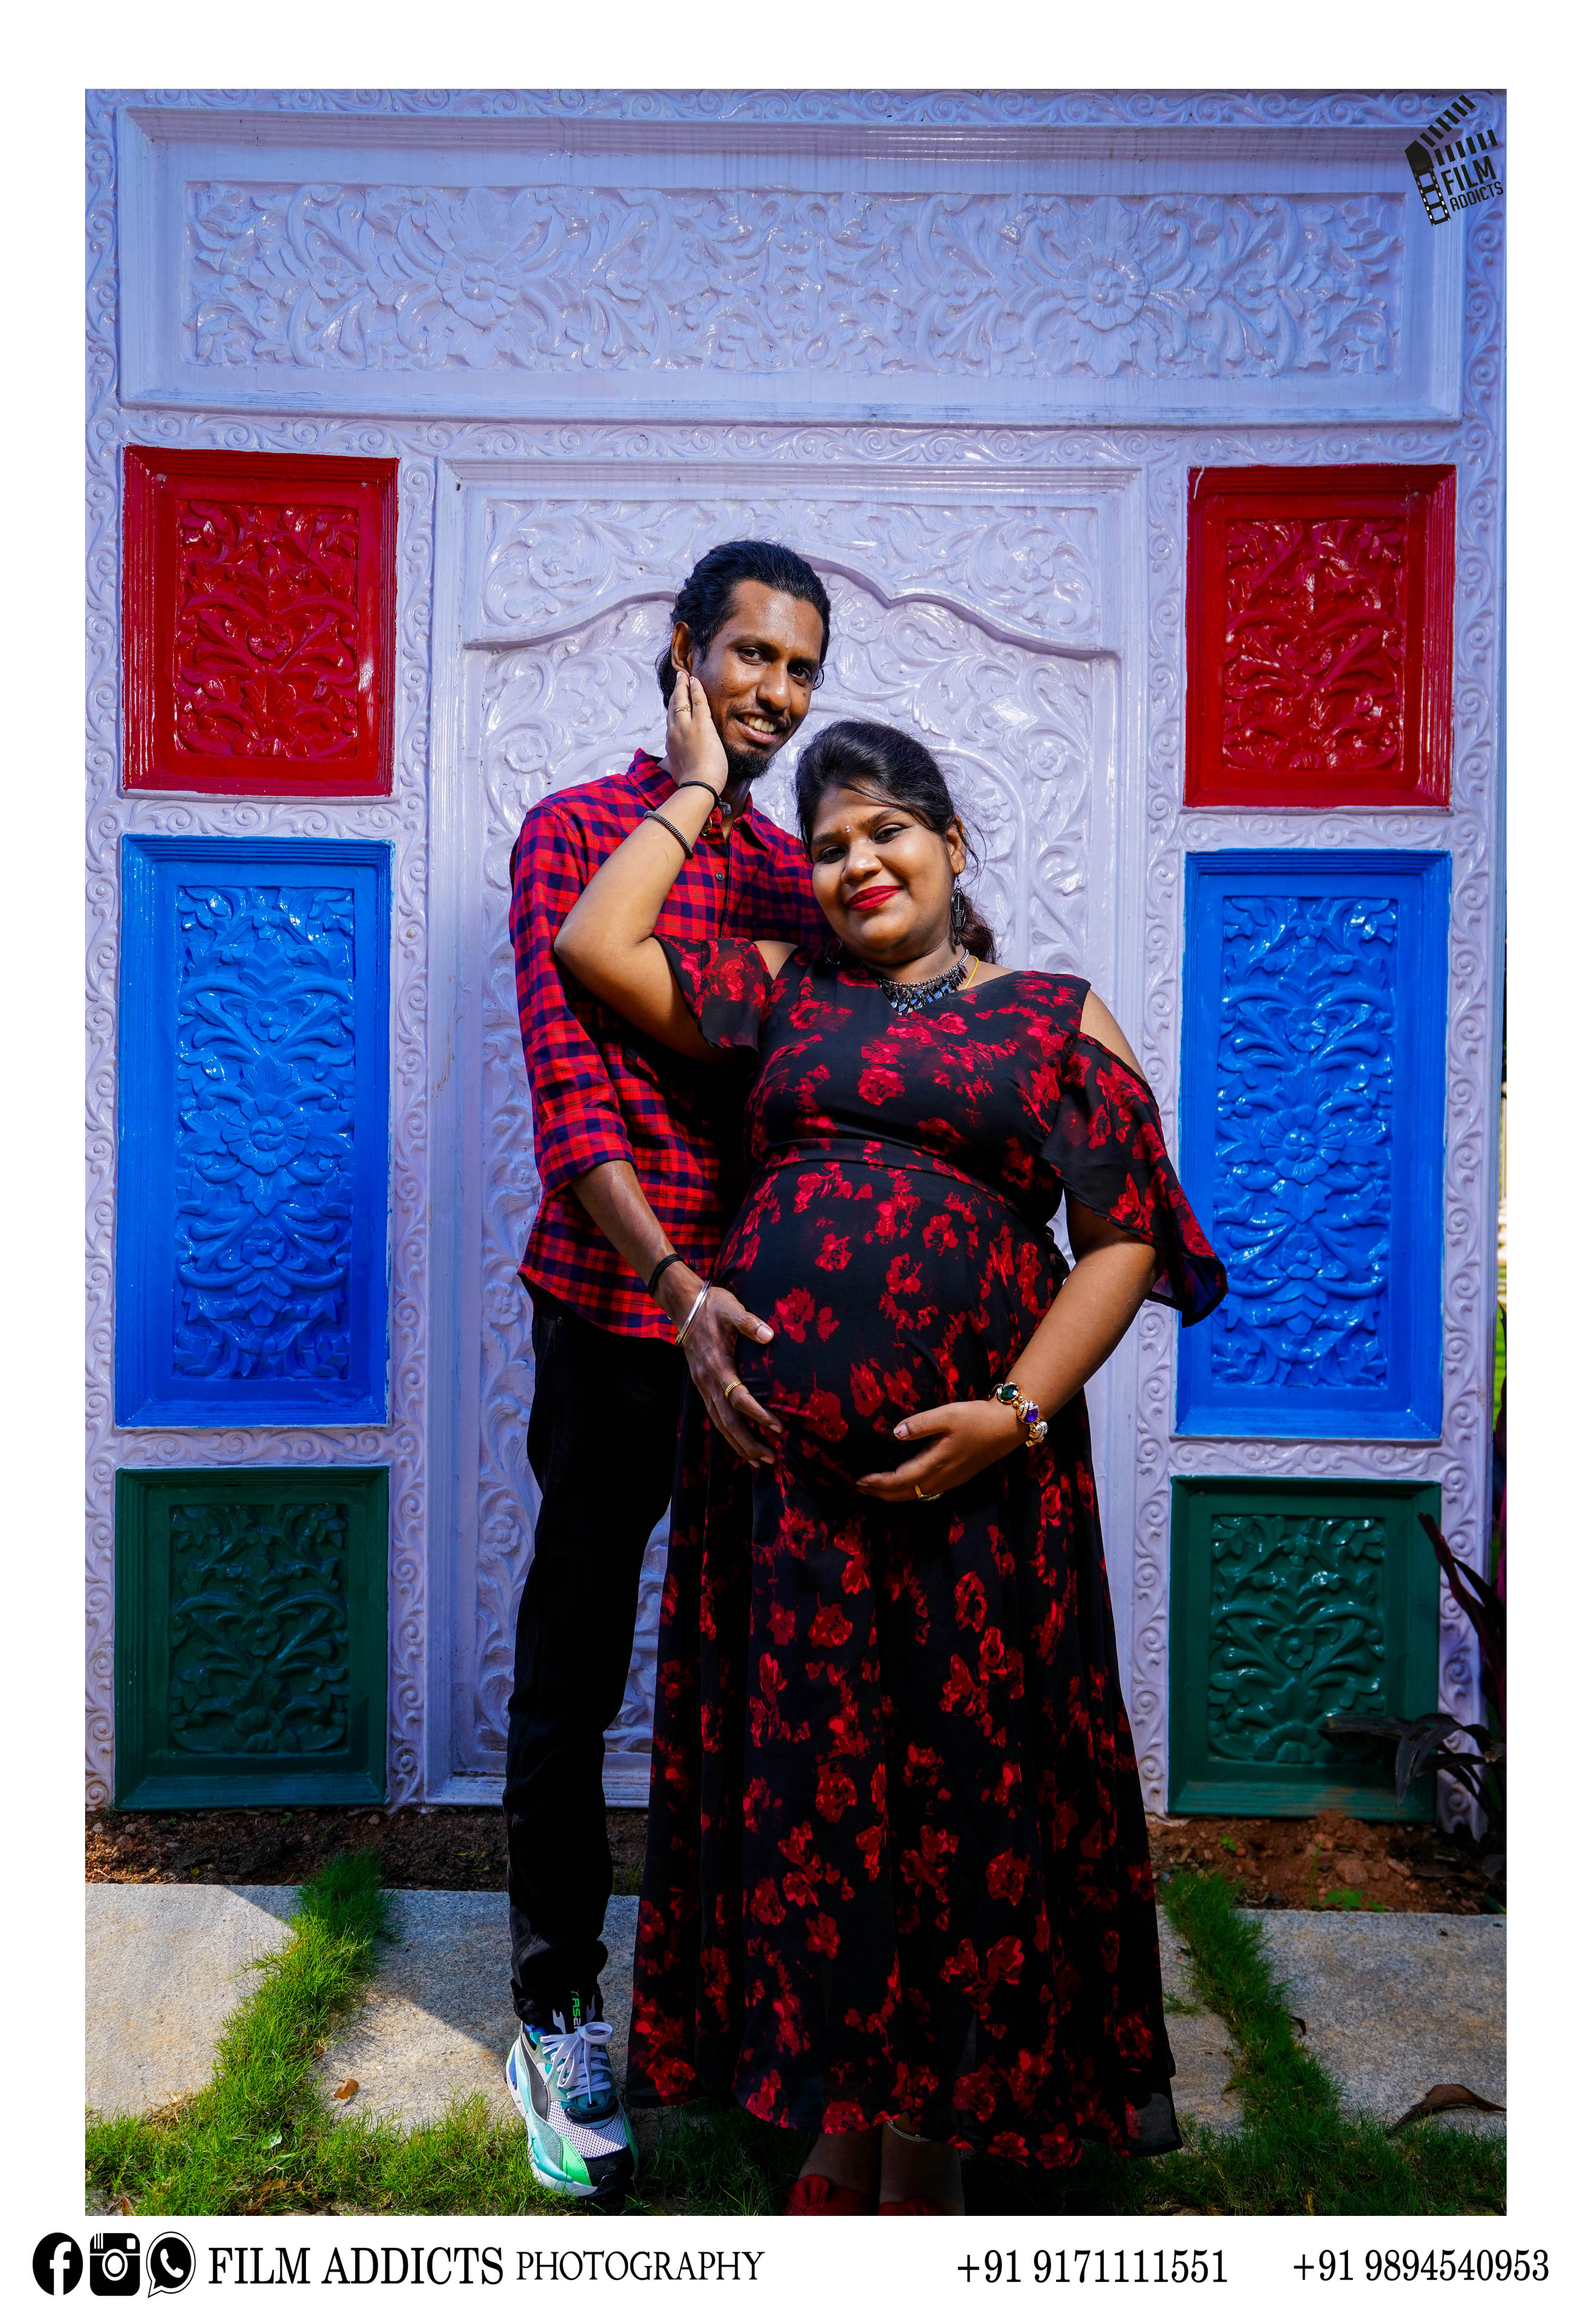 Best Baby Shower Photographers in Dindigul-FilmAddicts Photography,best wedding photography in Dindigul,best candid photographers in Dindigul,best candid photography in Dindigul,best marriage photographers in Dindigul,best marriage photography in Dindigul,best photographers in Dindigul,best photography in Dindigul,best wedding candid photography in Dindigul,best wedding candid photographers in Dindigul,best wedding video in Dindigul,best wedding videographers in Dindigul,best wedding videography in Dindigul,best candid videographers in Dindigul,best candid videography in Dindigul,best marriage videographers in Dindigul,best marriage videography in Dindigul,best videographers in Dindigul,best videography in Dindigul,best wedding candid videography in Dindigul,best wedding candid videographers in Dindigul,best helicam operators in Dindigul,best drone operators in Dindigul,best wedding studio in Dindigul,best professional photographers in Dindigul,best professional photography in Dindigul,No.1 wedding photographers in Dindigul,No.1 wedding photography in Dindigul,Dindigul wedding photographers,Dindigul wedding photography,Dindigul wedding videos,best candid videos in Dindigul,best candid photos in Dindigul,best helicam operators photography in Dindigul,best helicam operator photographers in Dindigul,best outdoor videography in Dindigul,best professional wedding photography in Dindigul,best outdoor photography in Dindigul,best outdoor photographers in Dindigul,best drone operators photographers in Dindigul,best wedding candid videography in Dindigul,tamilnadu wedding photography, tamilnadu.